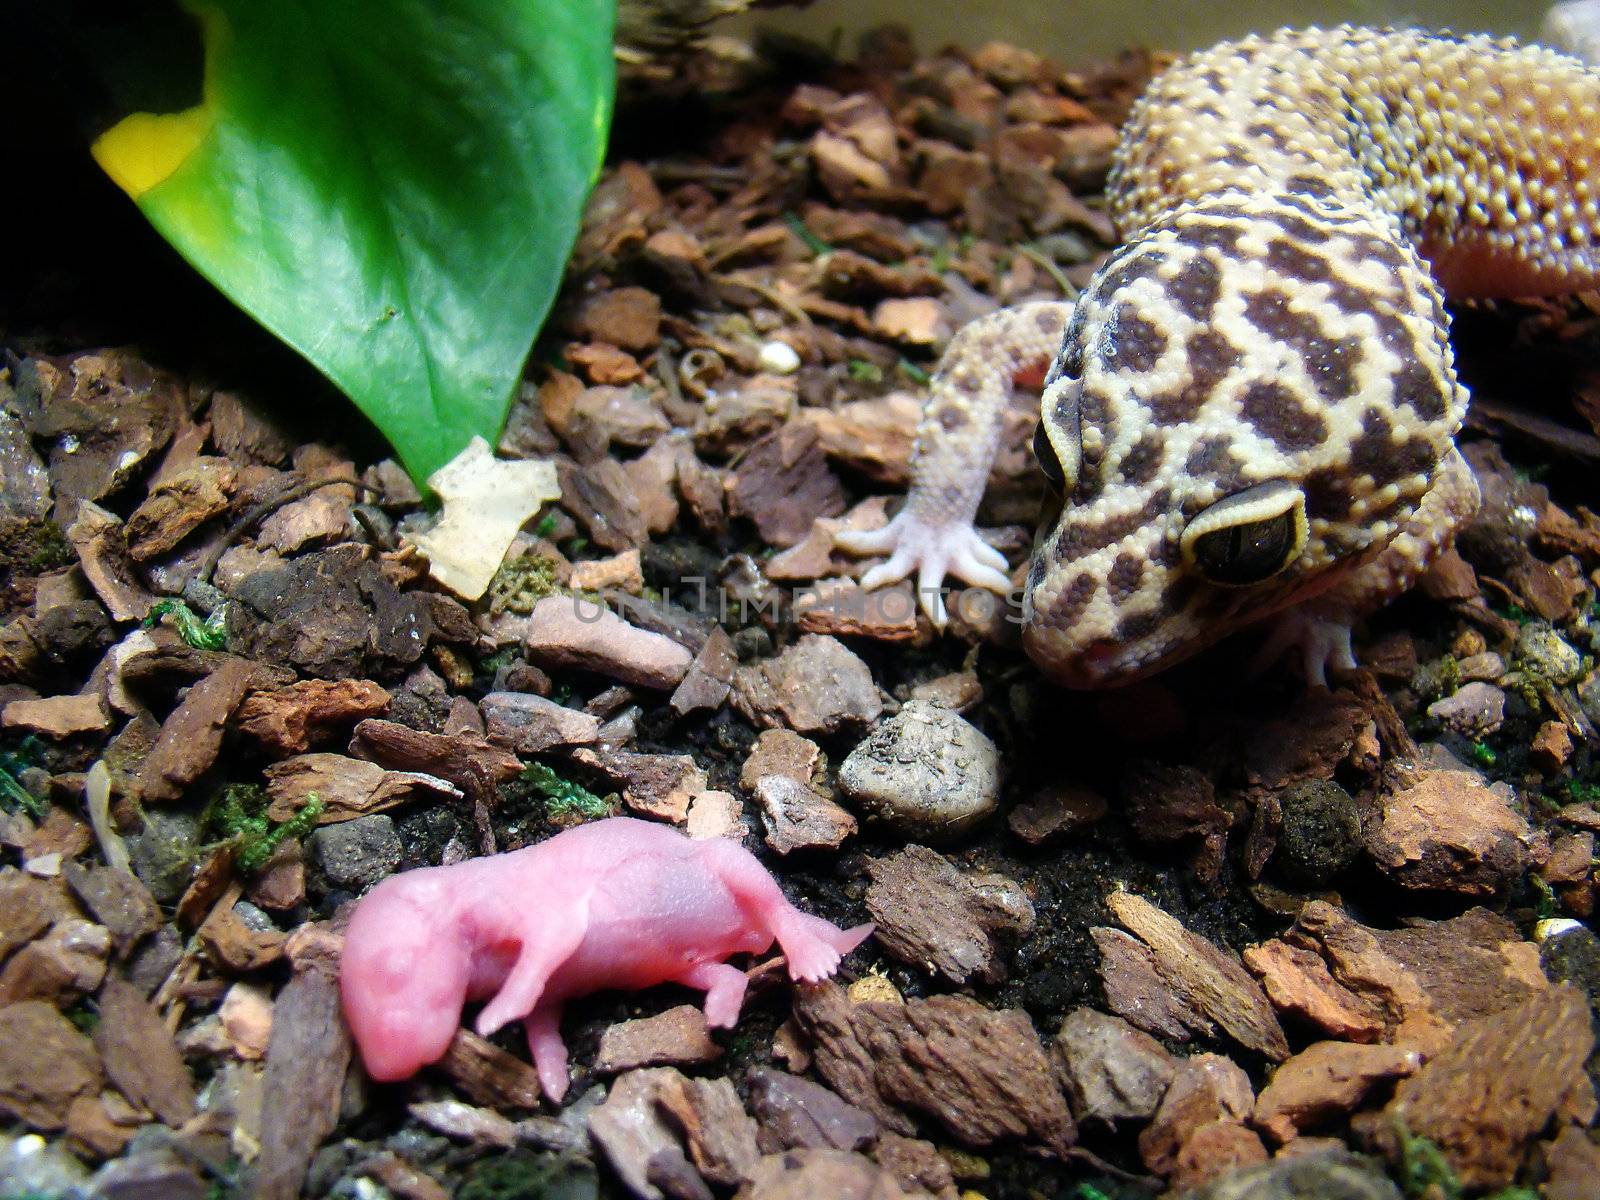 an adult female leopard gecko about to eat a baby pinky feeder mouse